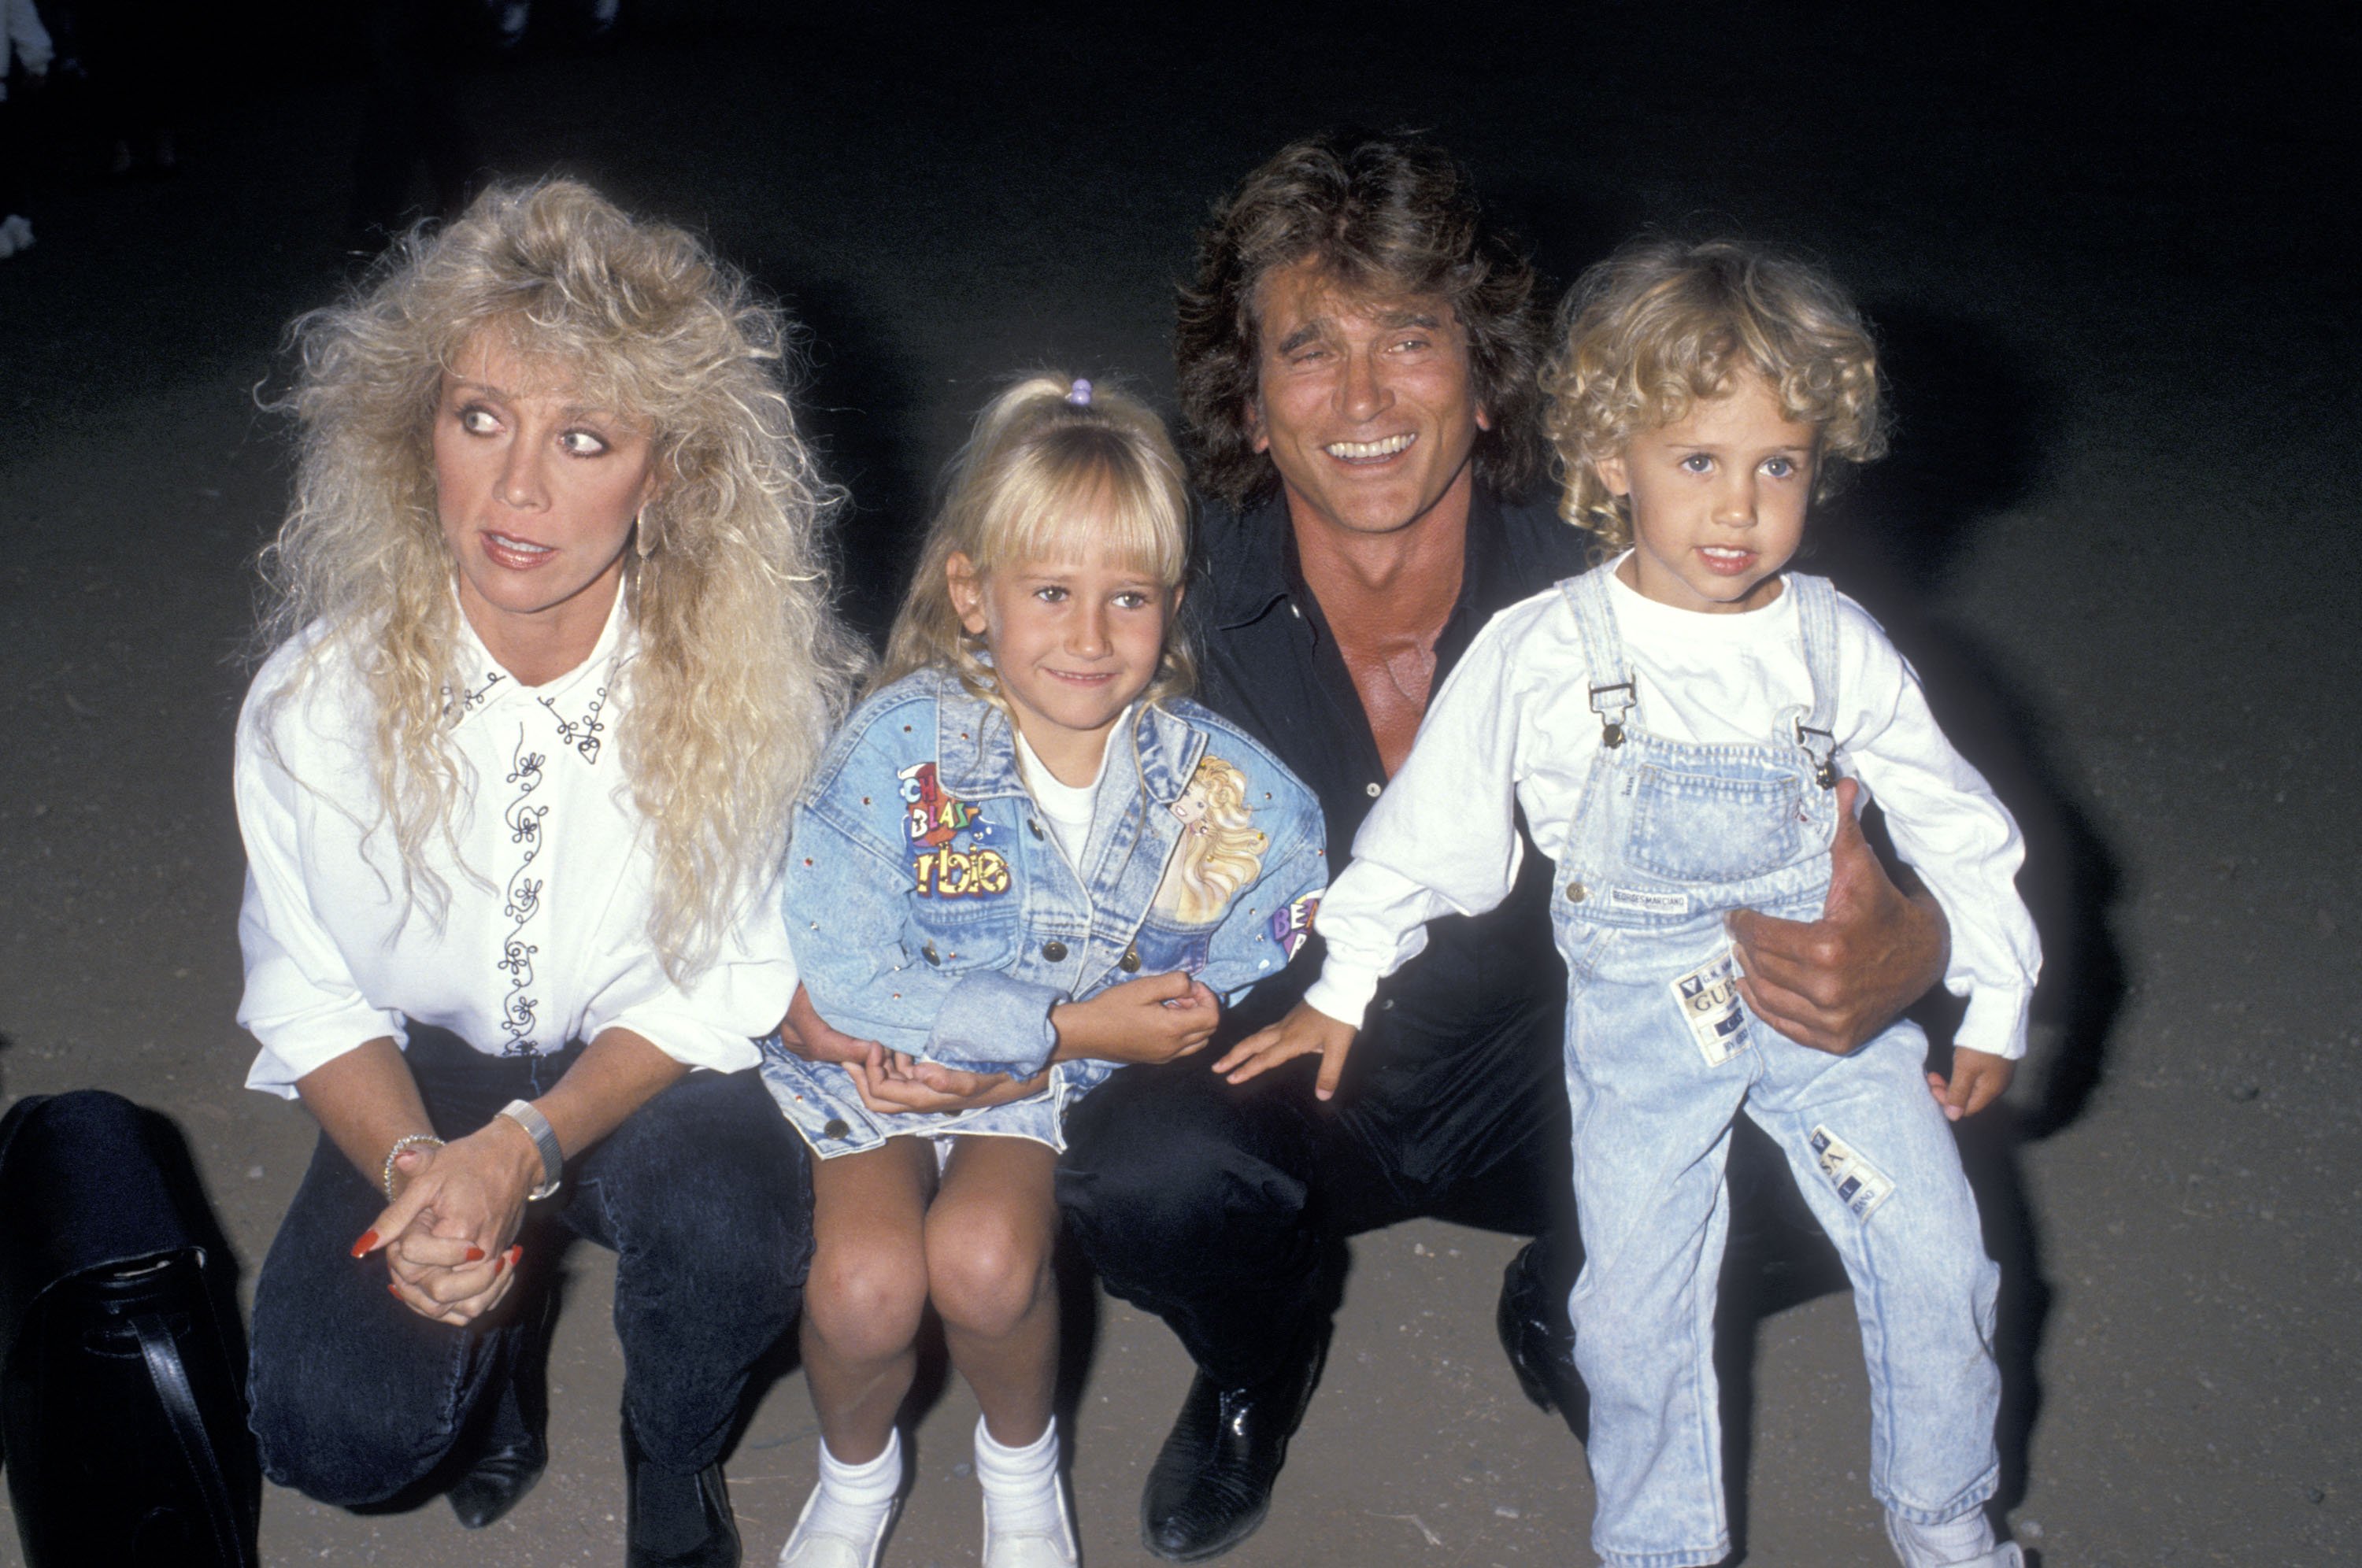 Actor Michael Landon, wife Cindy Landon, daughter Jennifer Landon and son Sean Landon attend the Third Annual Moonlight Roundup Extravaganza to Benefit Free Arts for Abused Children on July 29, 1989 at the Calamigos Ranch in Malibu, California.